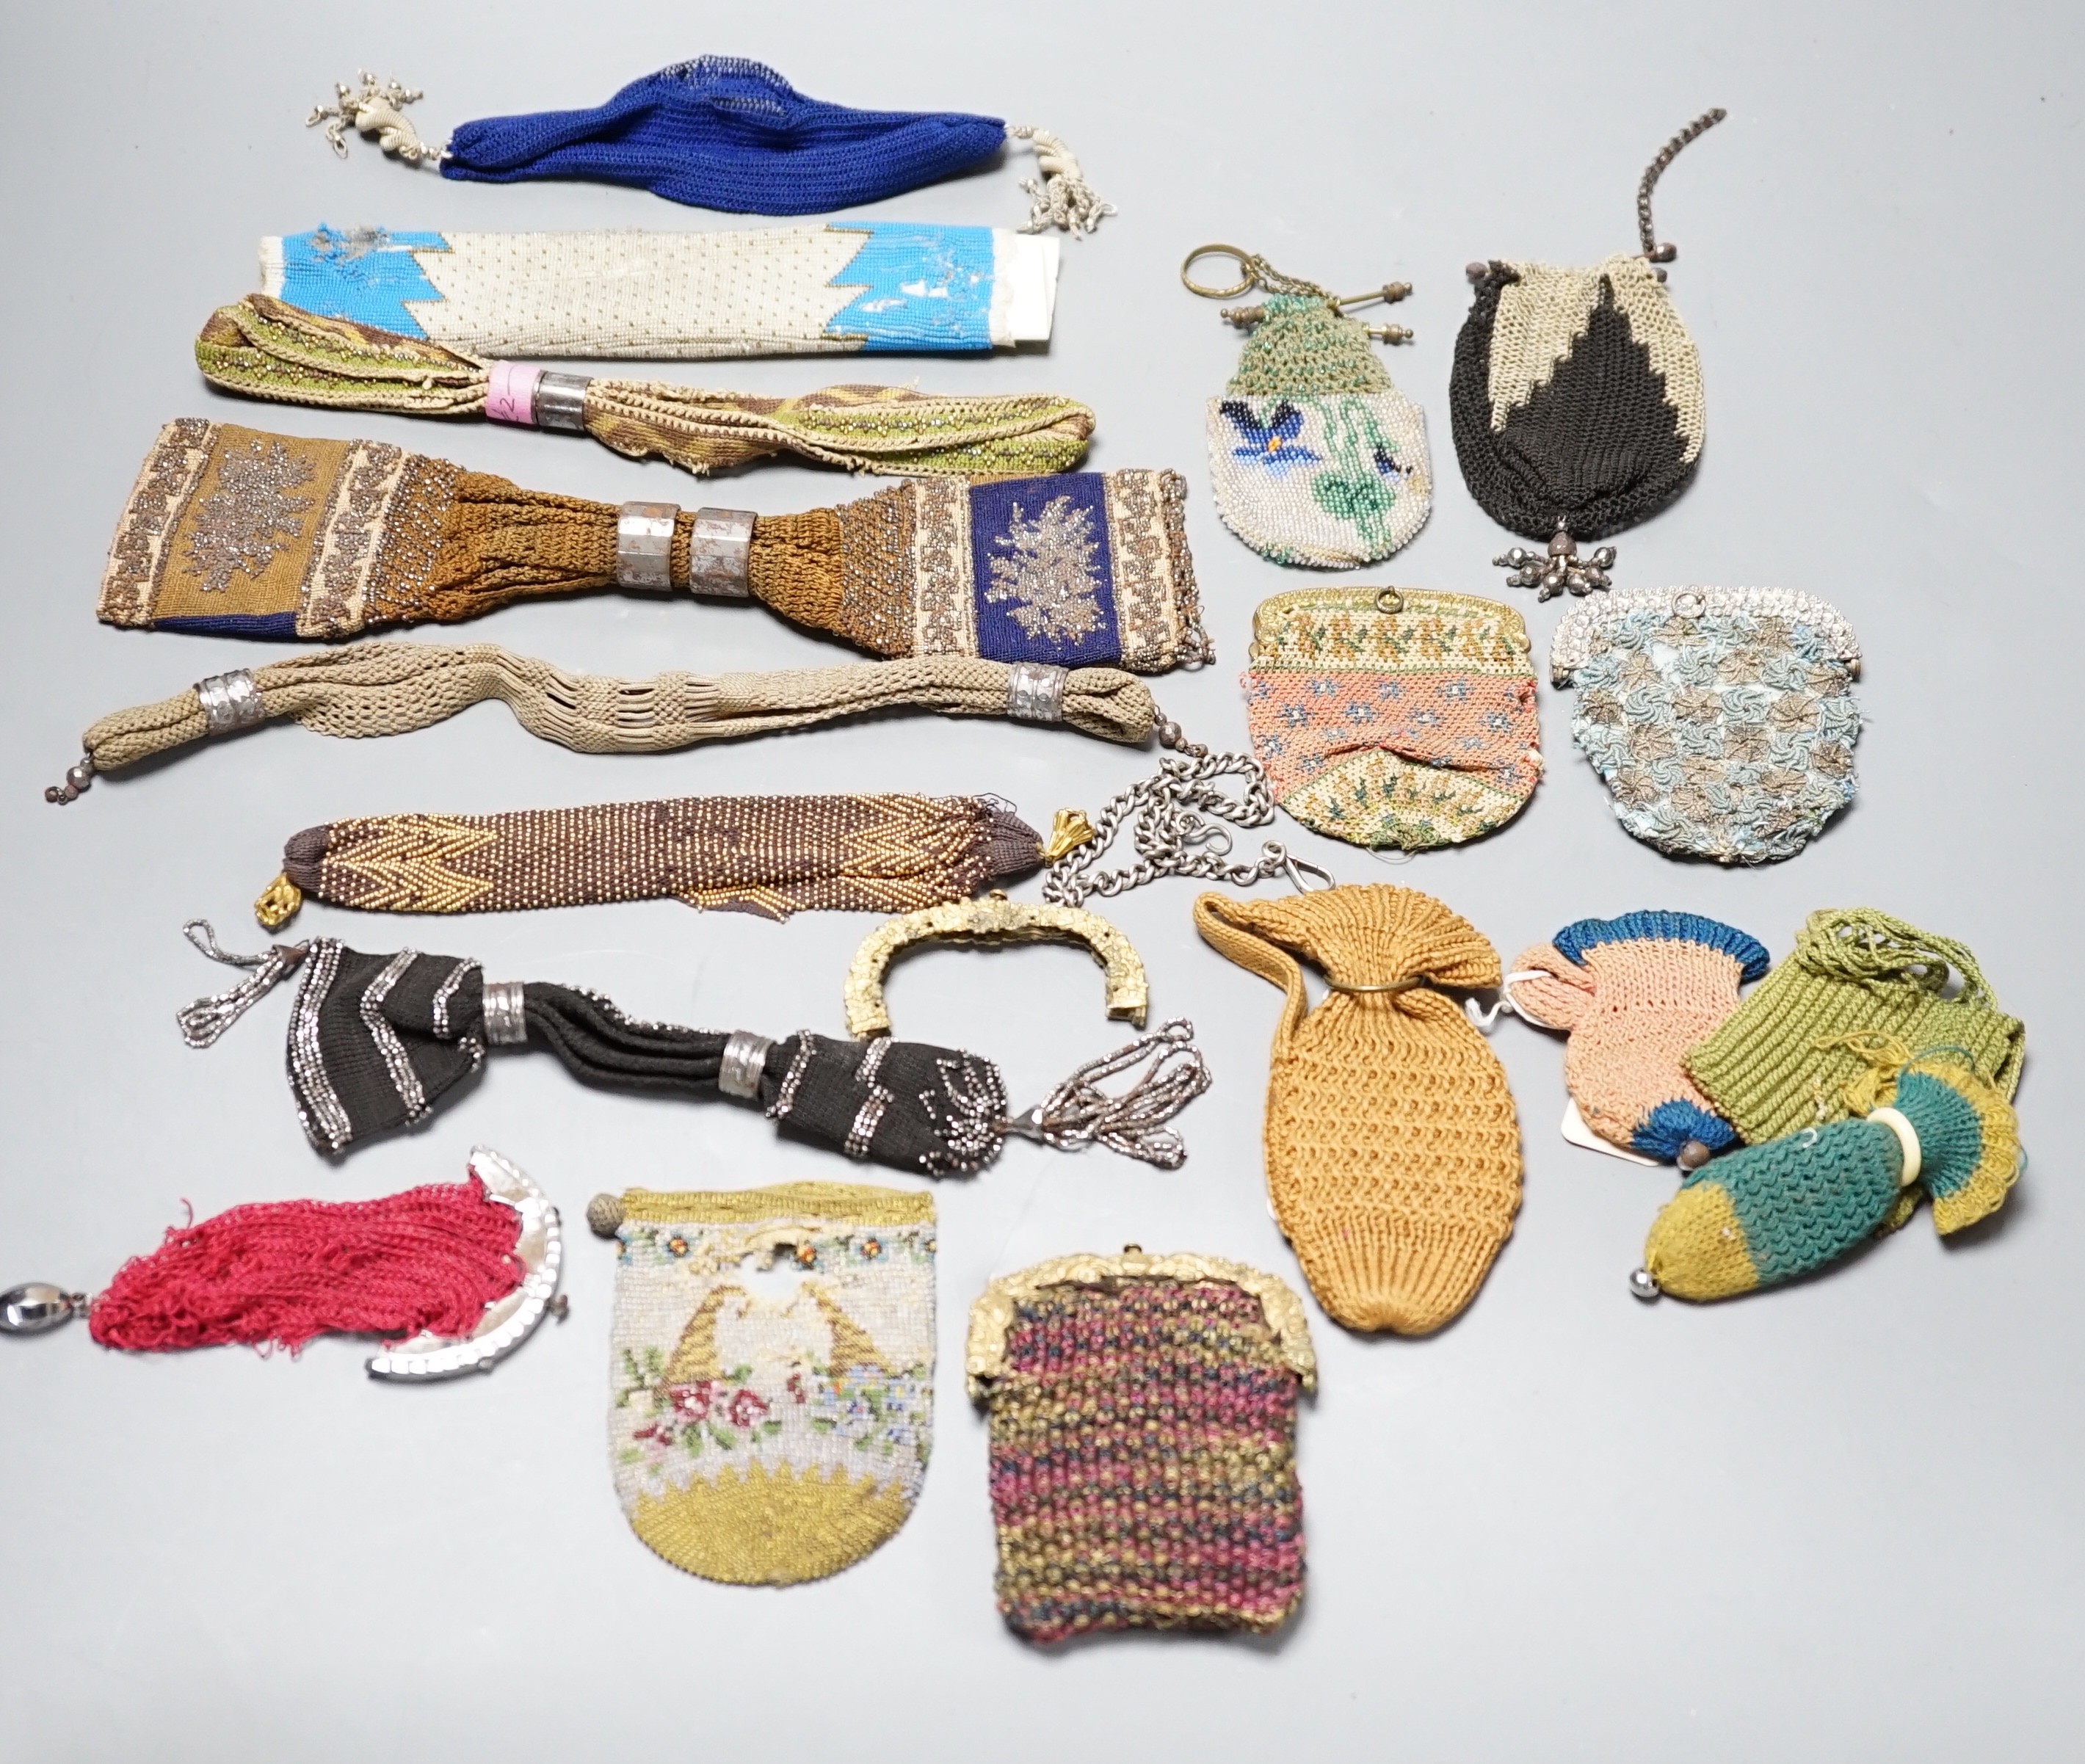 Seven 19th century cut steel misers purses, five beaded and knitted metal framed purses, two reticules, two novelty knitted jug shaped purses and two others